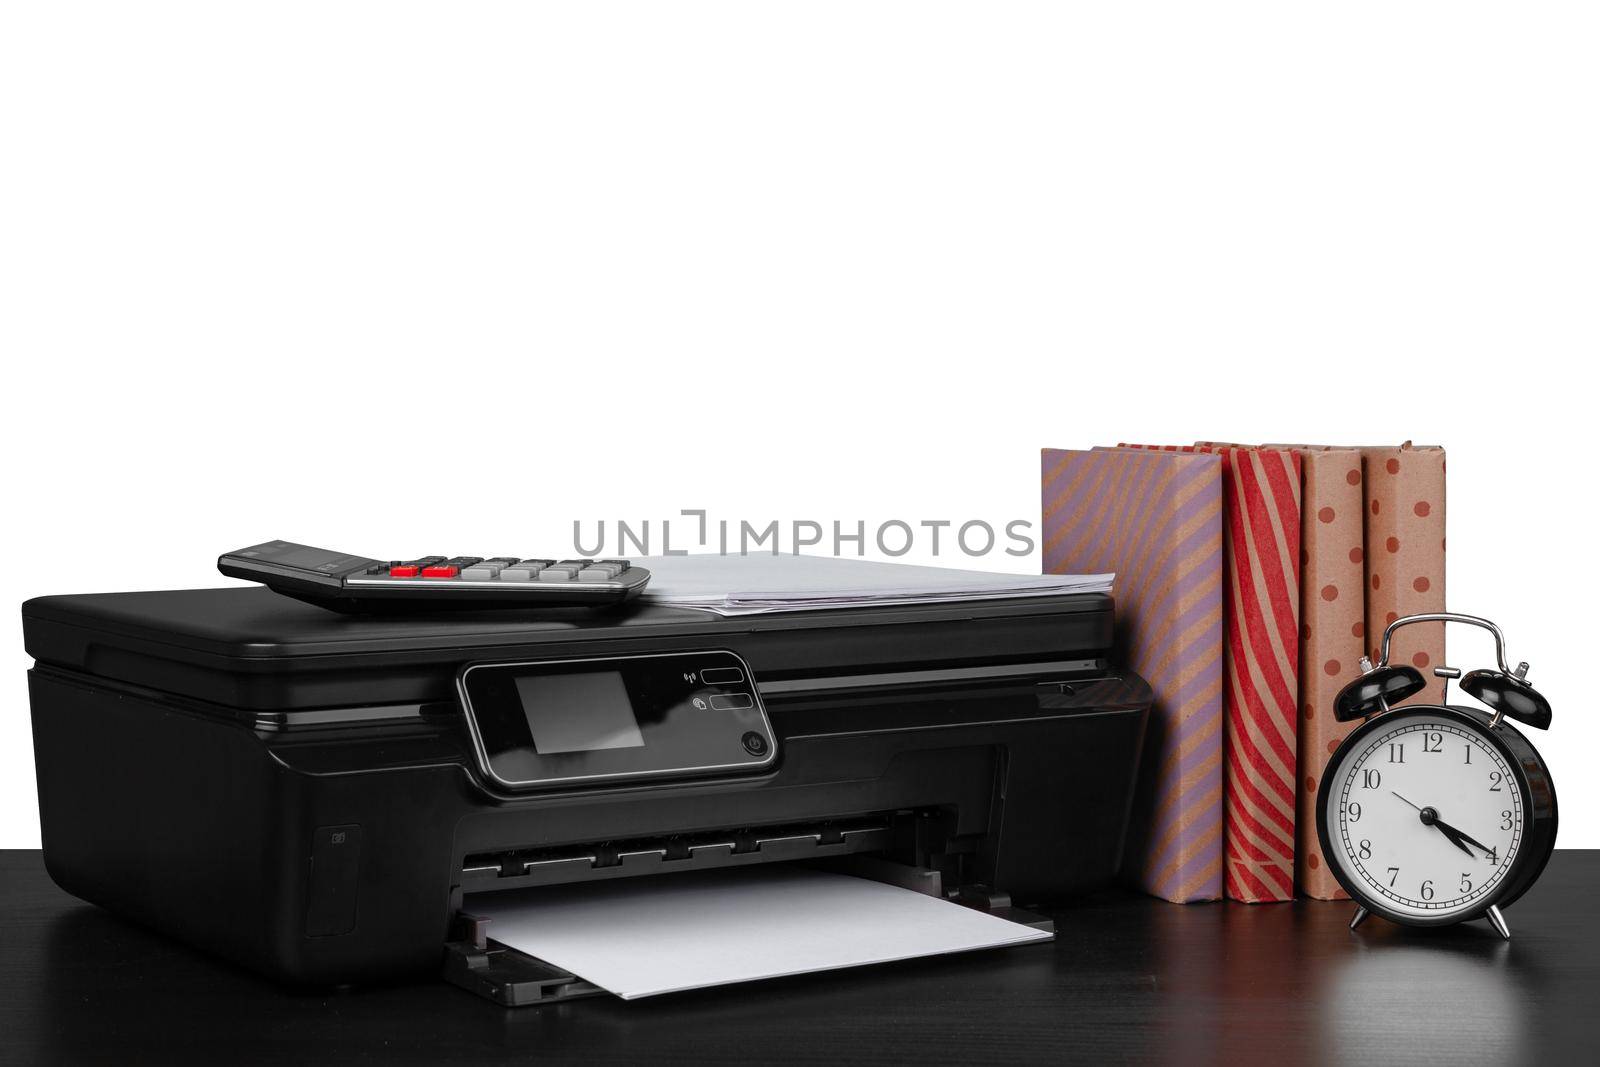 Printer and stack of books on black table against white background, close up